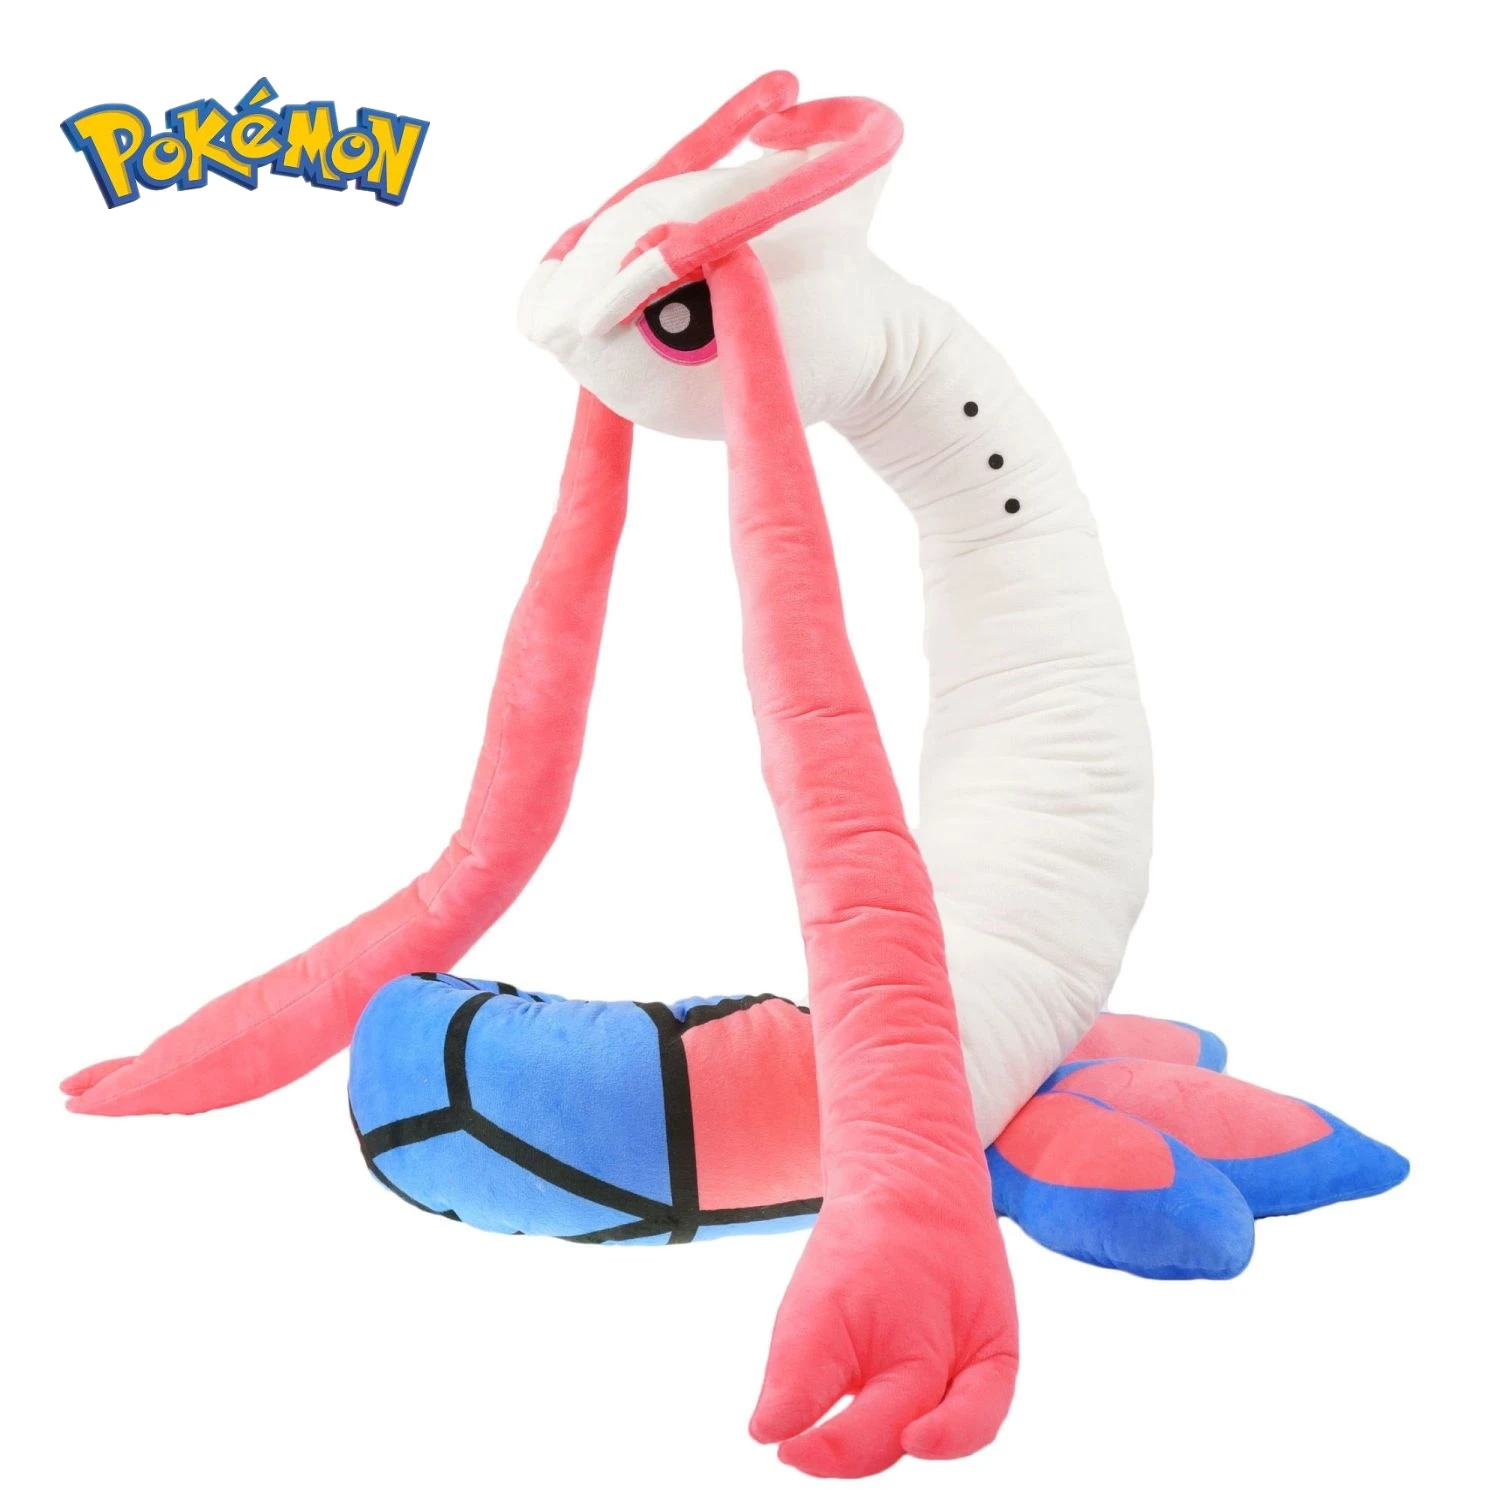 

2m Long Pokemon Milotic Plush Peluche TAKARA TOMY Toys Stuffed Toy Anime Pink Cartoon Doll Cosplay Pillow Toy Gift for Childrens